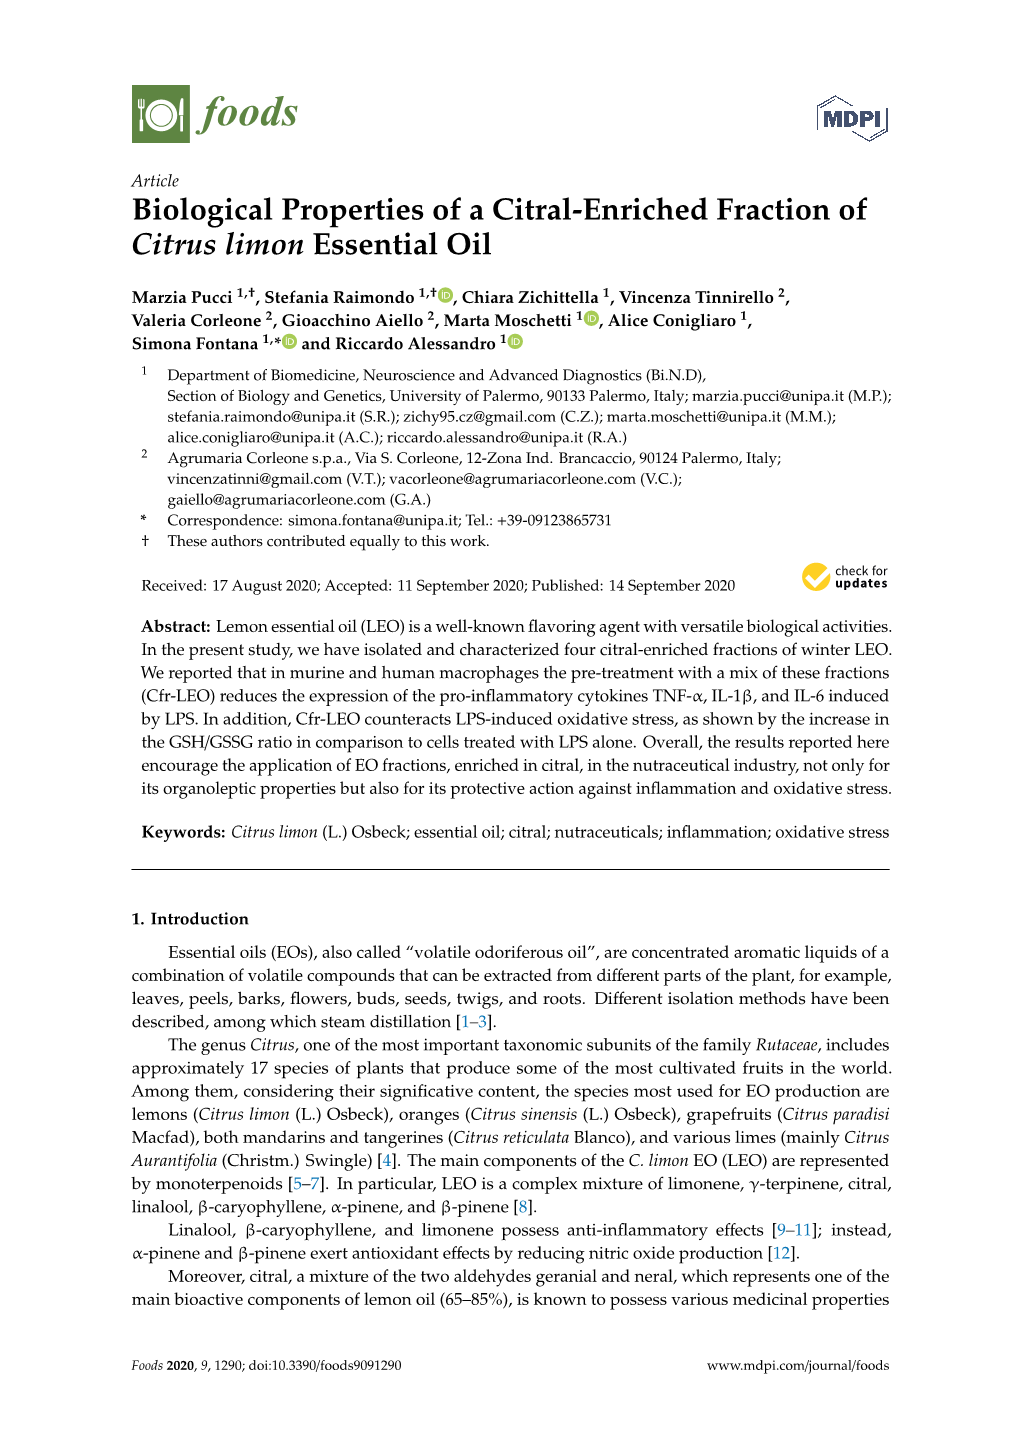 Biological Properties of a Citral-Enriched Fraction of Citrus Limon Essential Oil